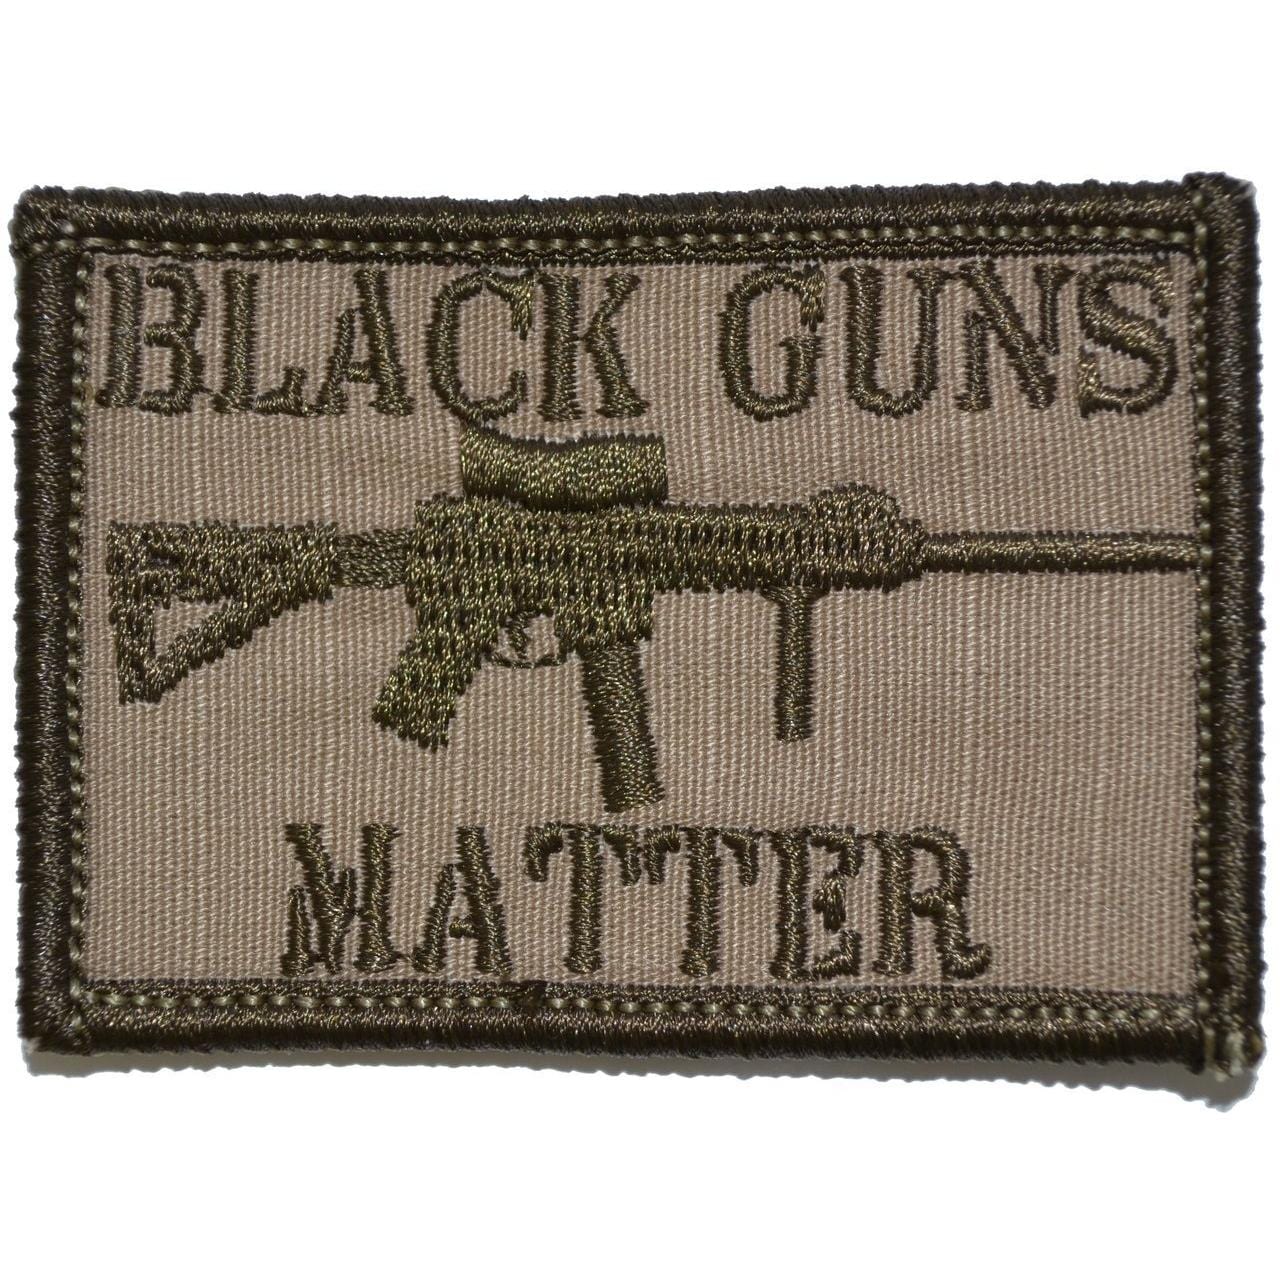 Tactical Gear Junkie Patches Coyote Brown Black Guns Matter - 2x3 Patch